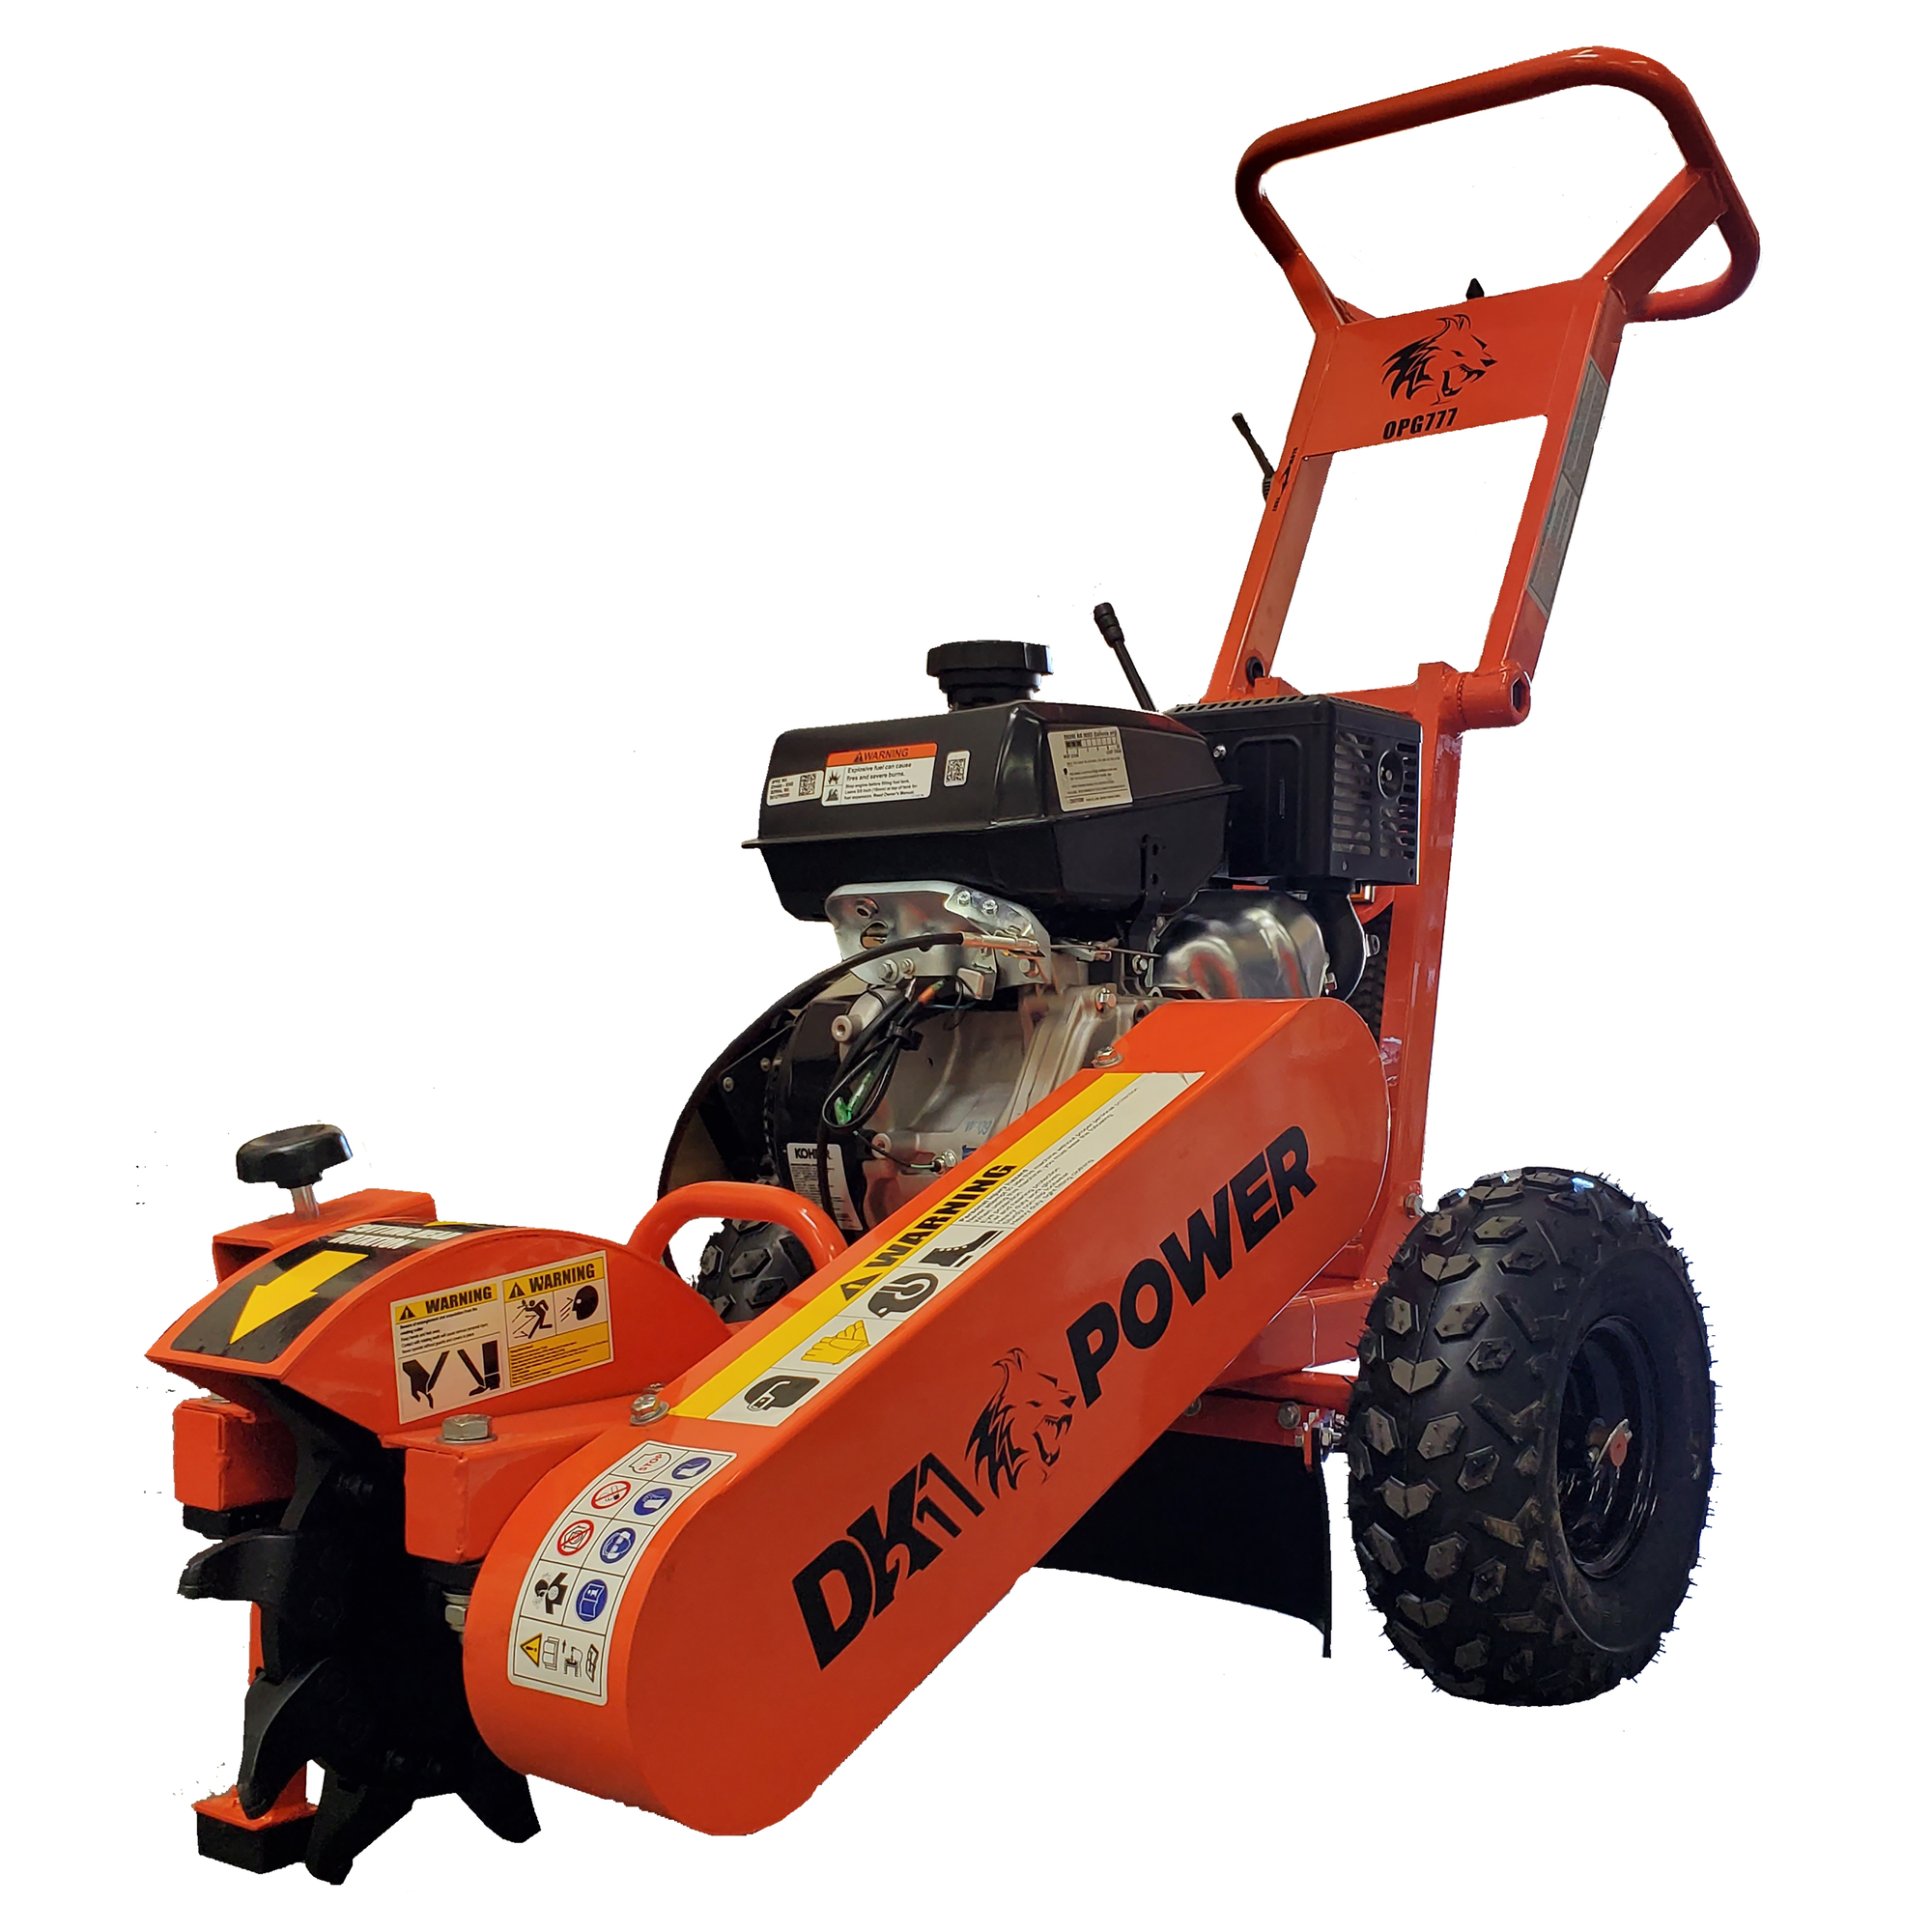 DK2 Power, Stump grinder 14hp hd commercial frame, Engine Displacement 429 cc, Horsepower 14, Max. Cutting Thickness 3.5 in, Model OPG777